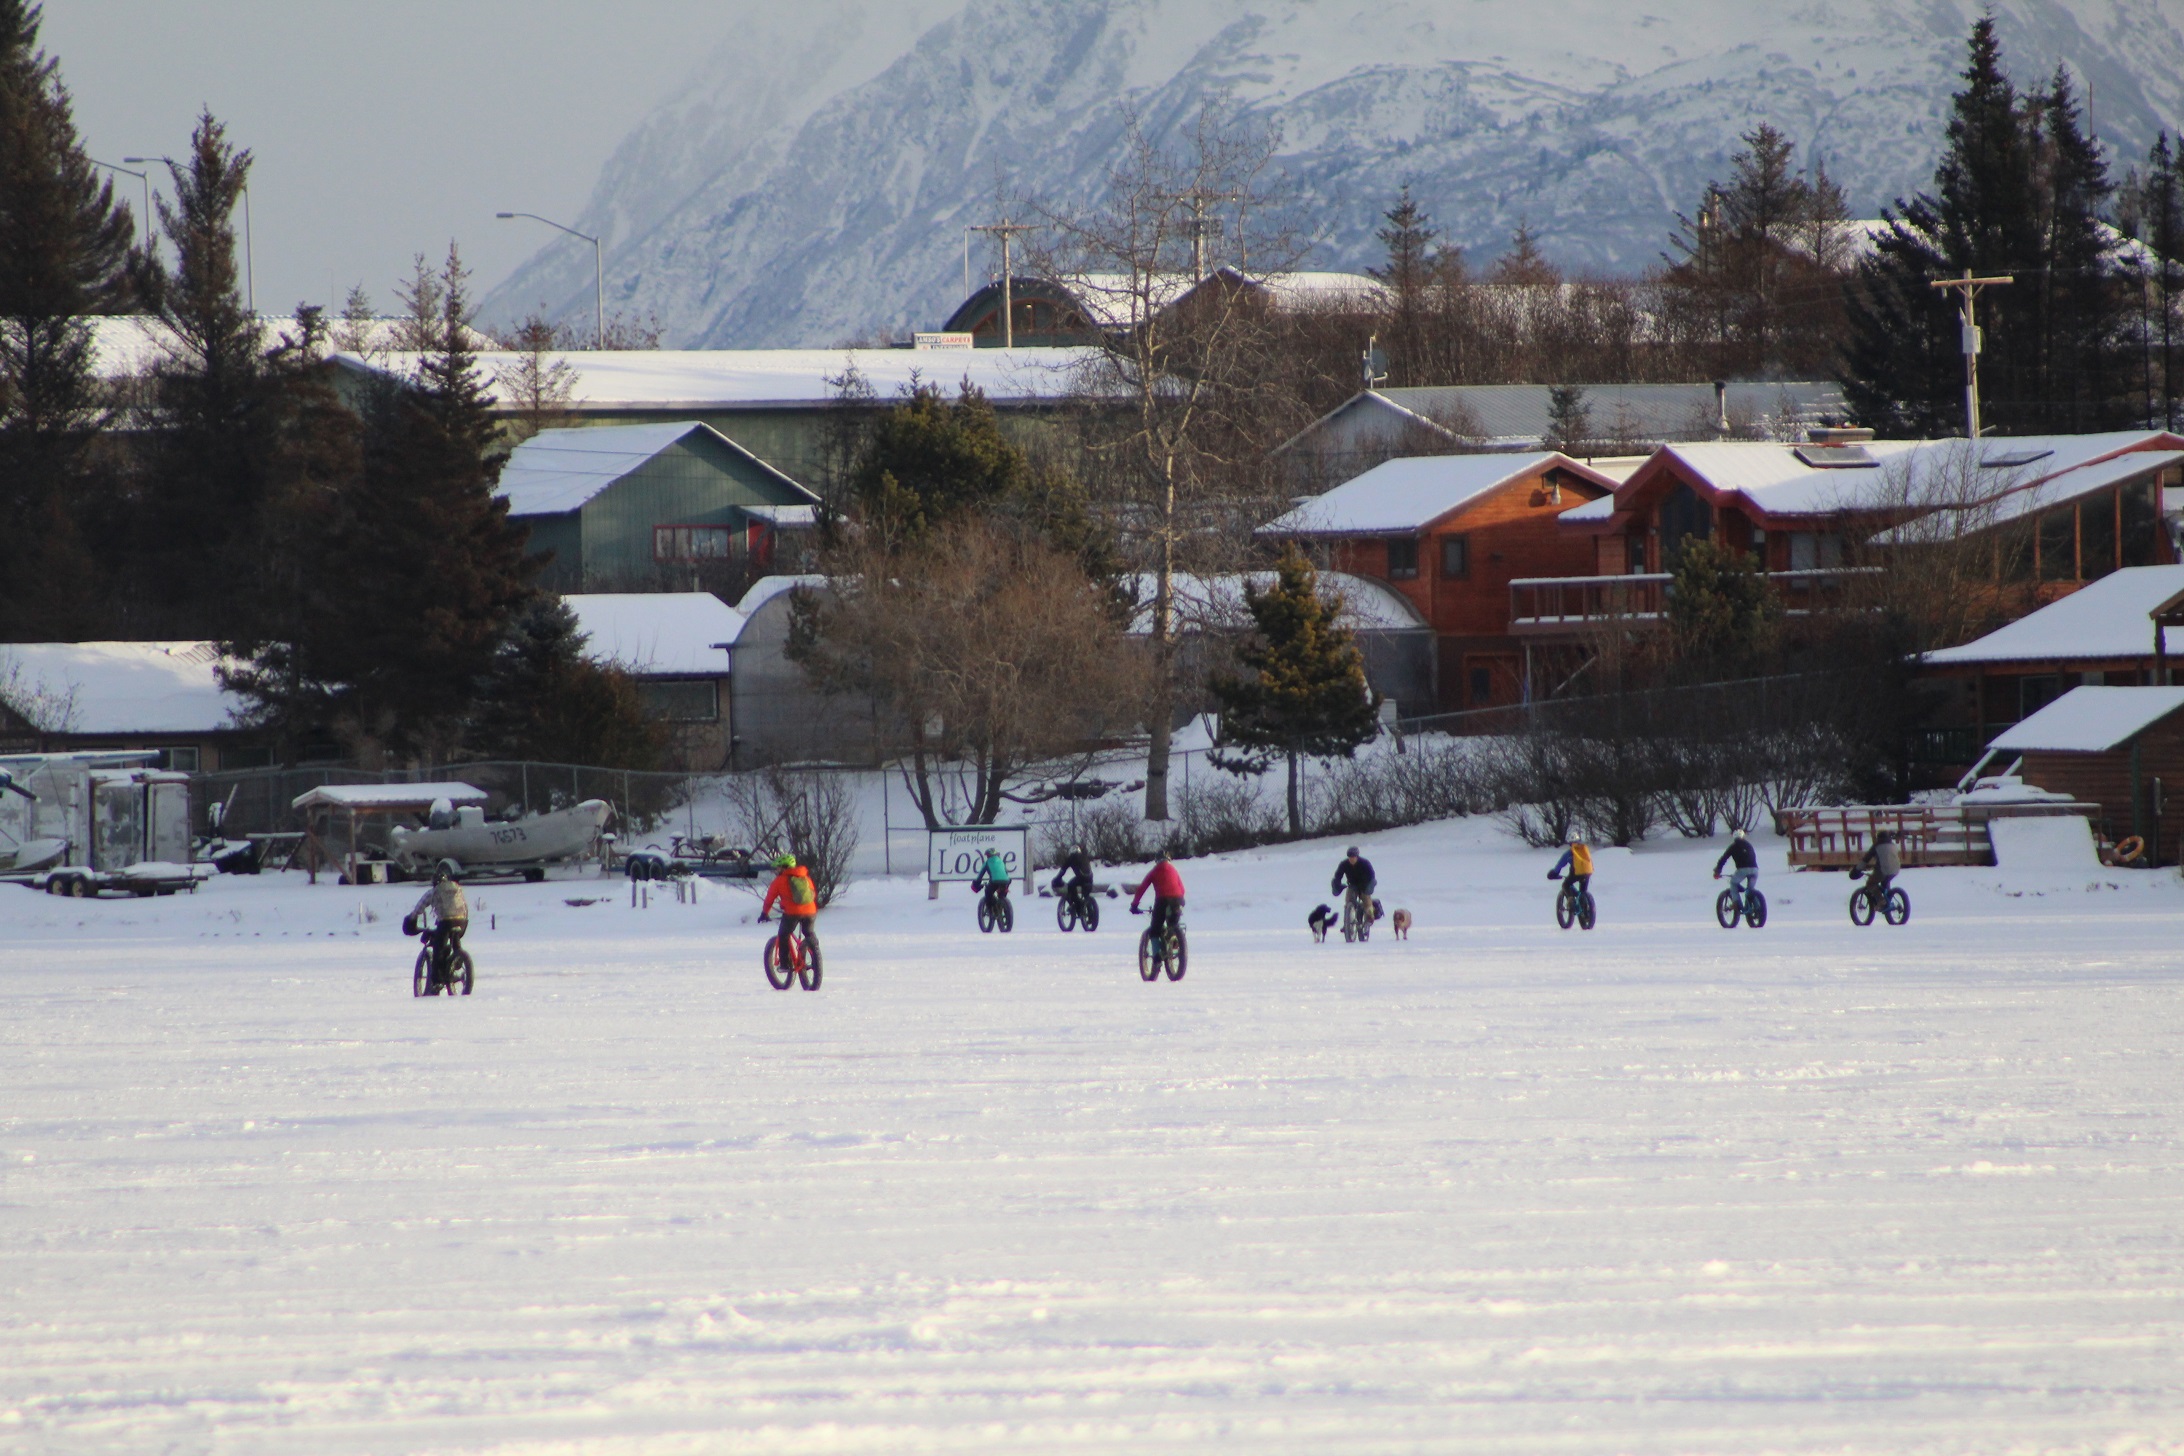 A group of fat-tire bicyclists ride across Beluga Lake last Saturday. The bikes with big, wide tires make riding on snow and sand easy, and have become popular in Homer and Alaska over the past few years.-Photo by Anna Frost, Homer News